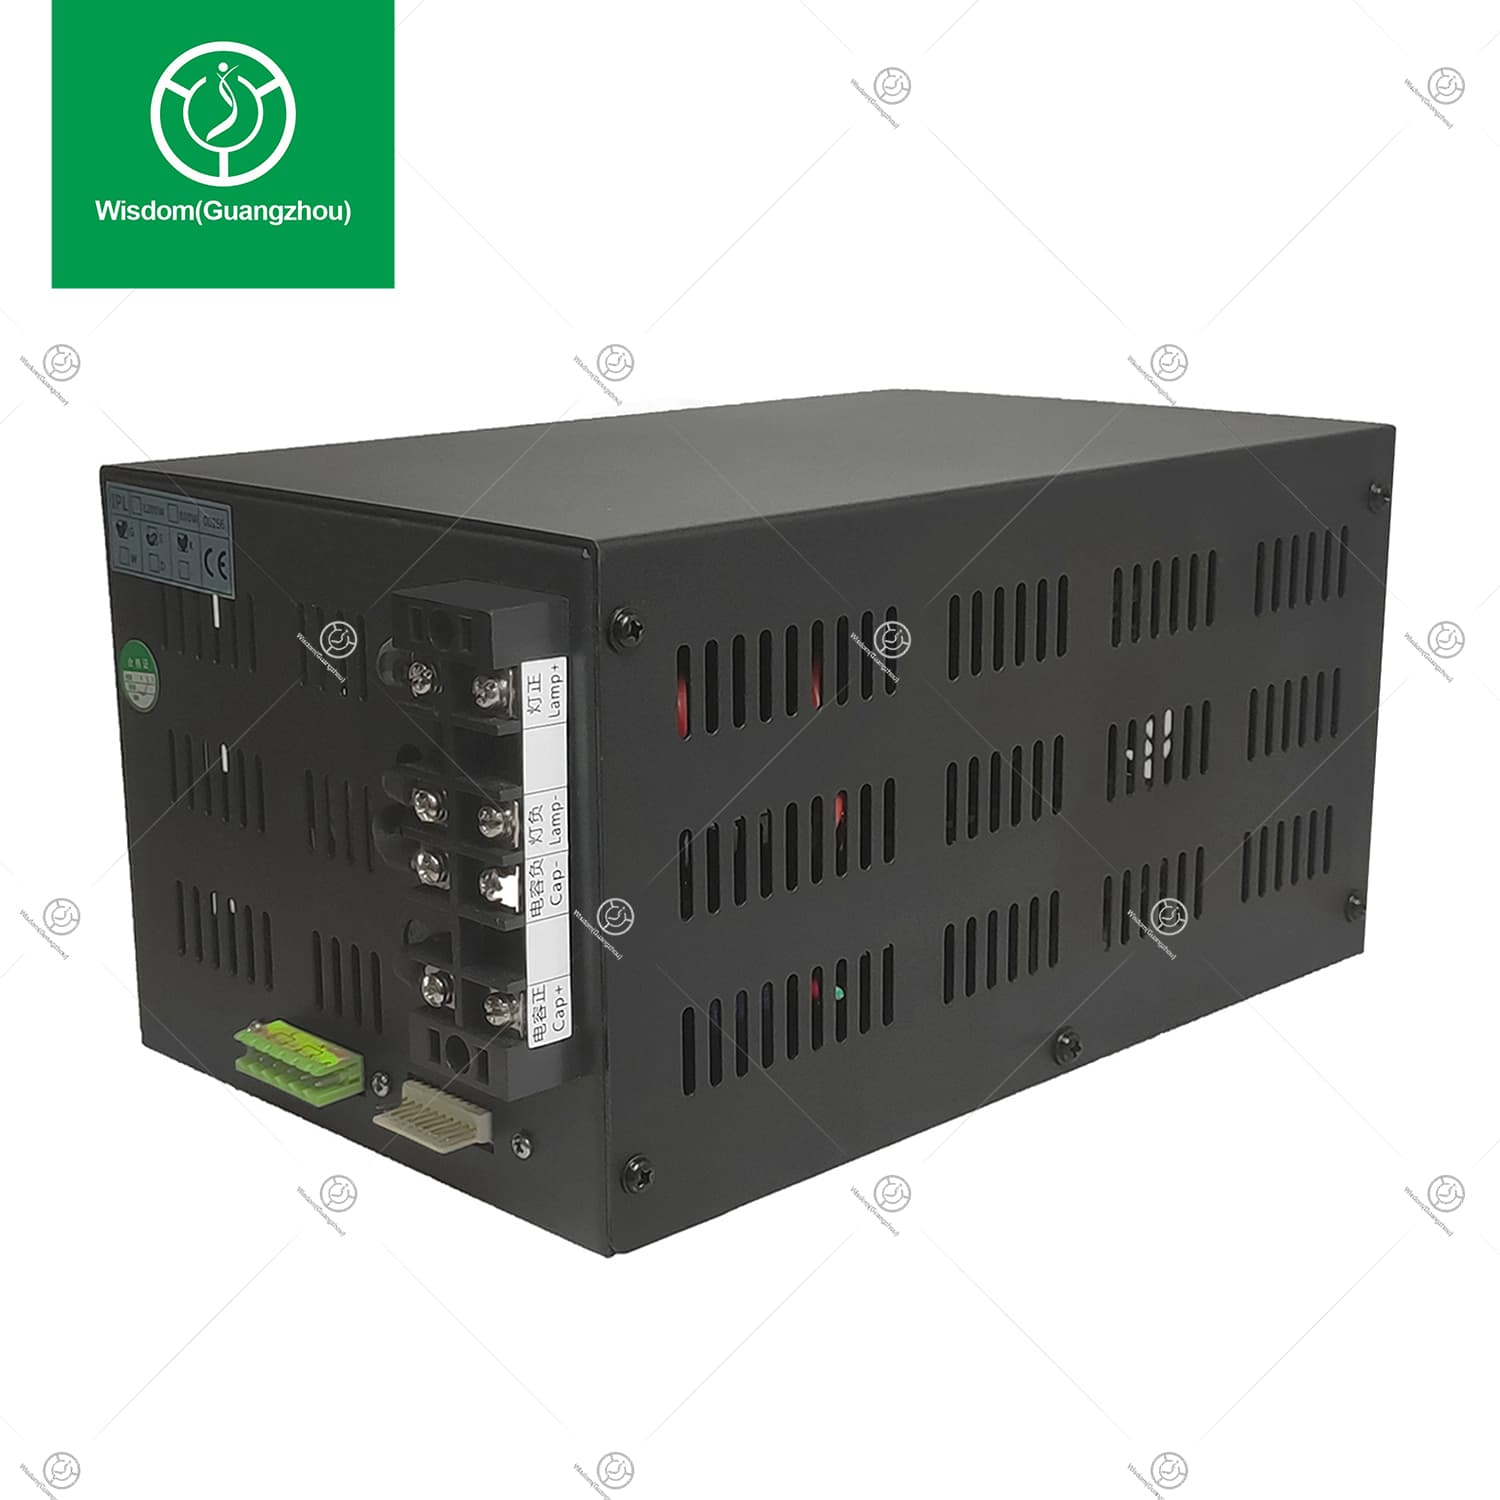 800W IPL Power Supply Is of High Quality And Good Reputation